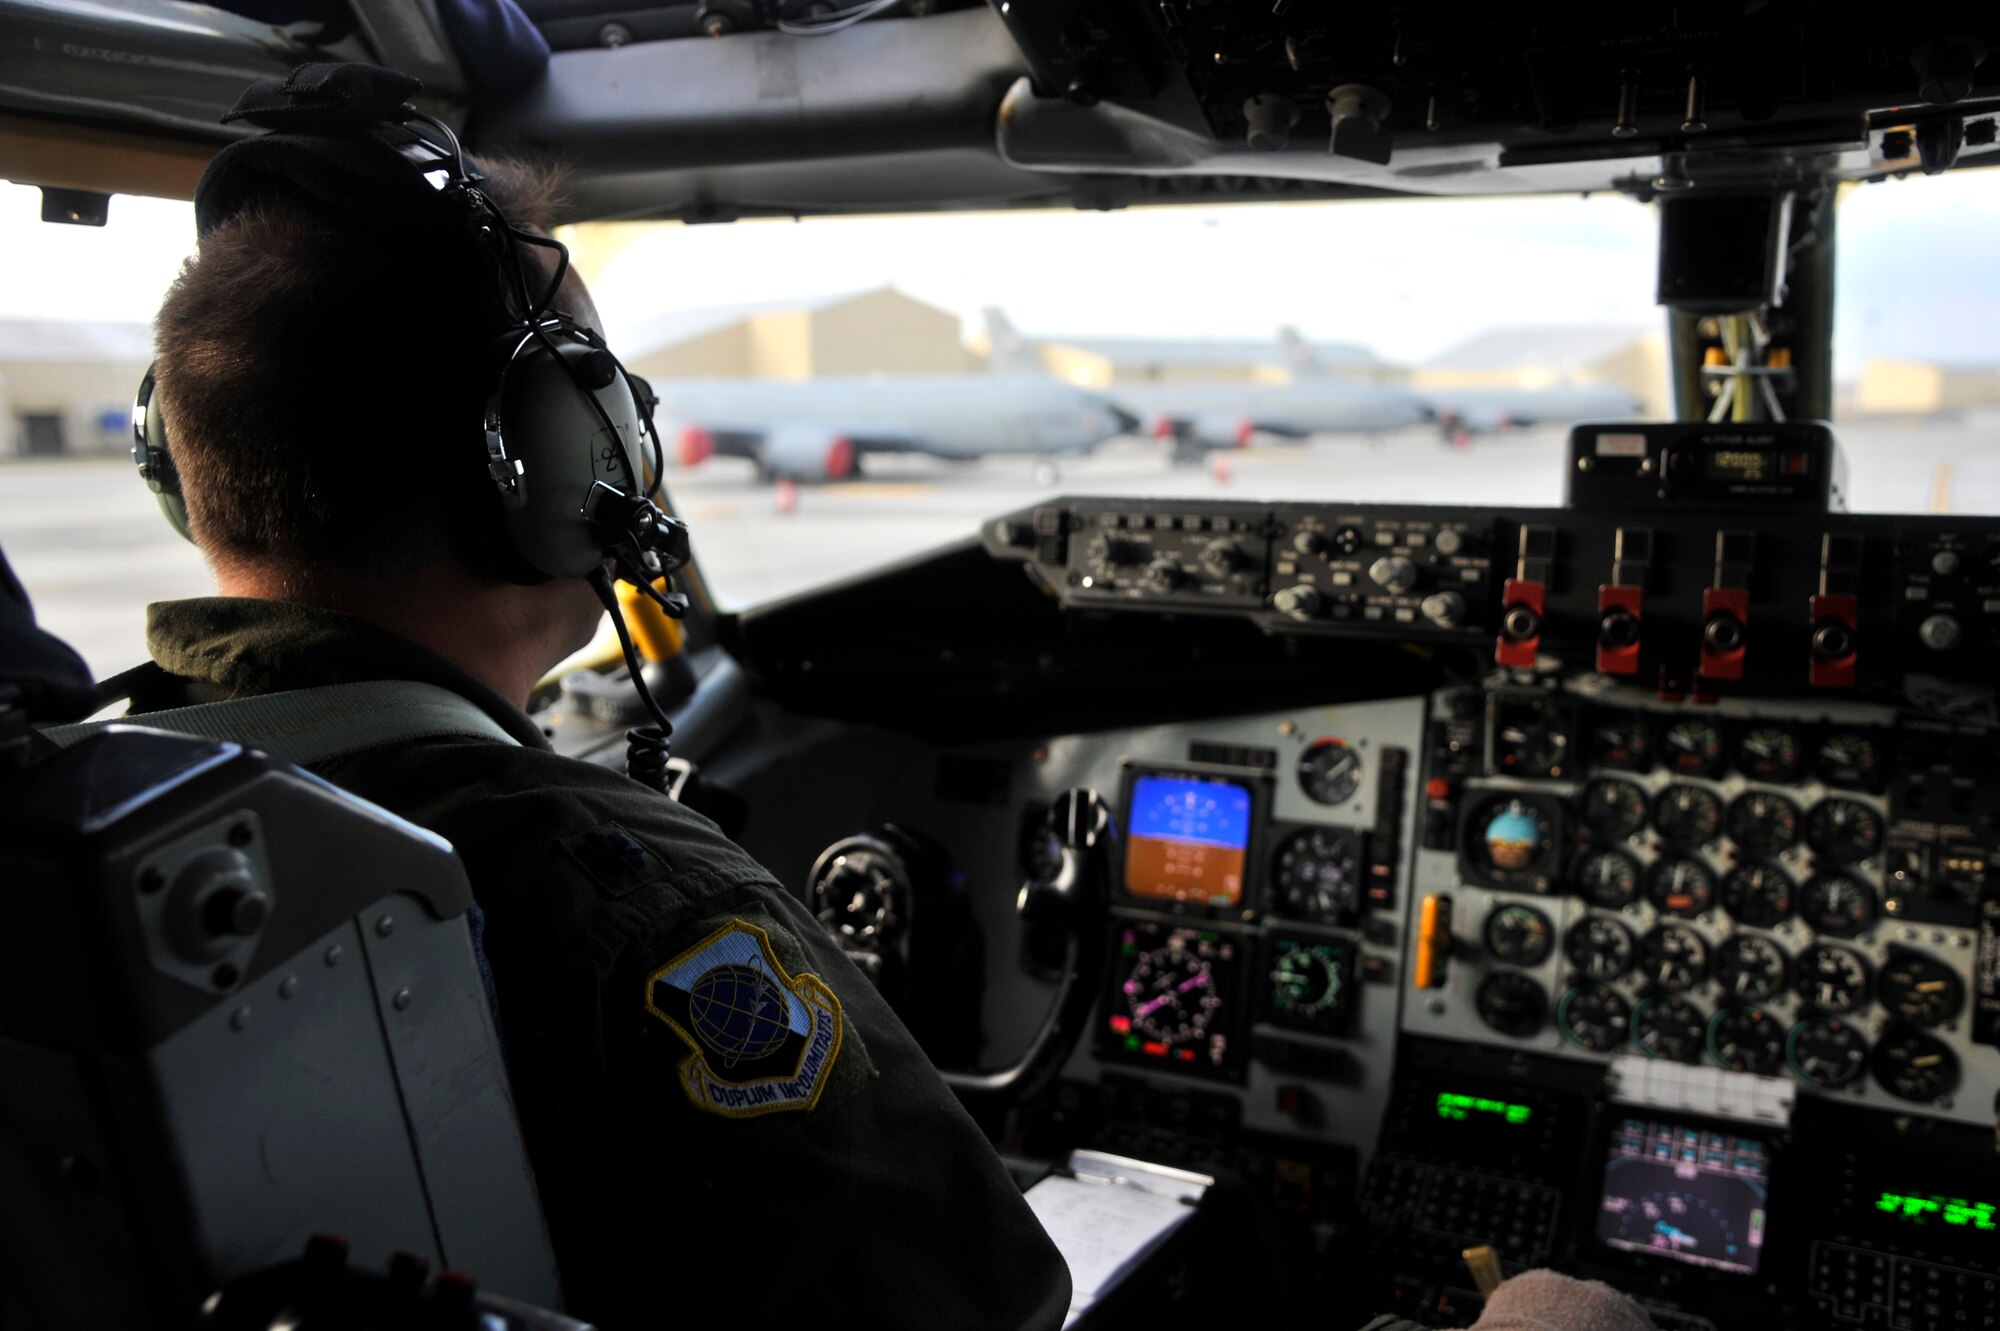 Lt. Col. David Parlotz taxis toward the runway at Fairchild Air Force Base, Washington, Sept. 23, 2014. This KC-135 Stratotanker, assigned to the 92nd Air Refueling Wing, usually transports a crew of three, including a pilot, co-pilot and boom operator. Parlotz is the 92nd ARW Inspector General. (U.S. Air Force photo by Senior Airman Mary O'Dell/Released)